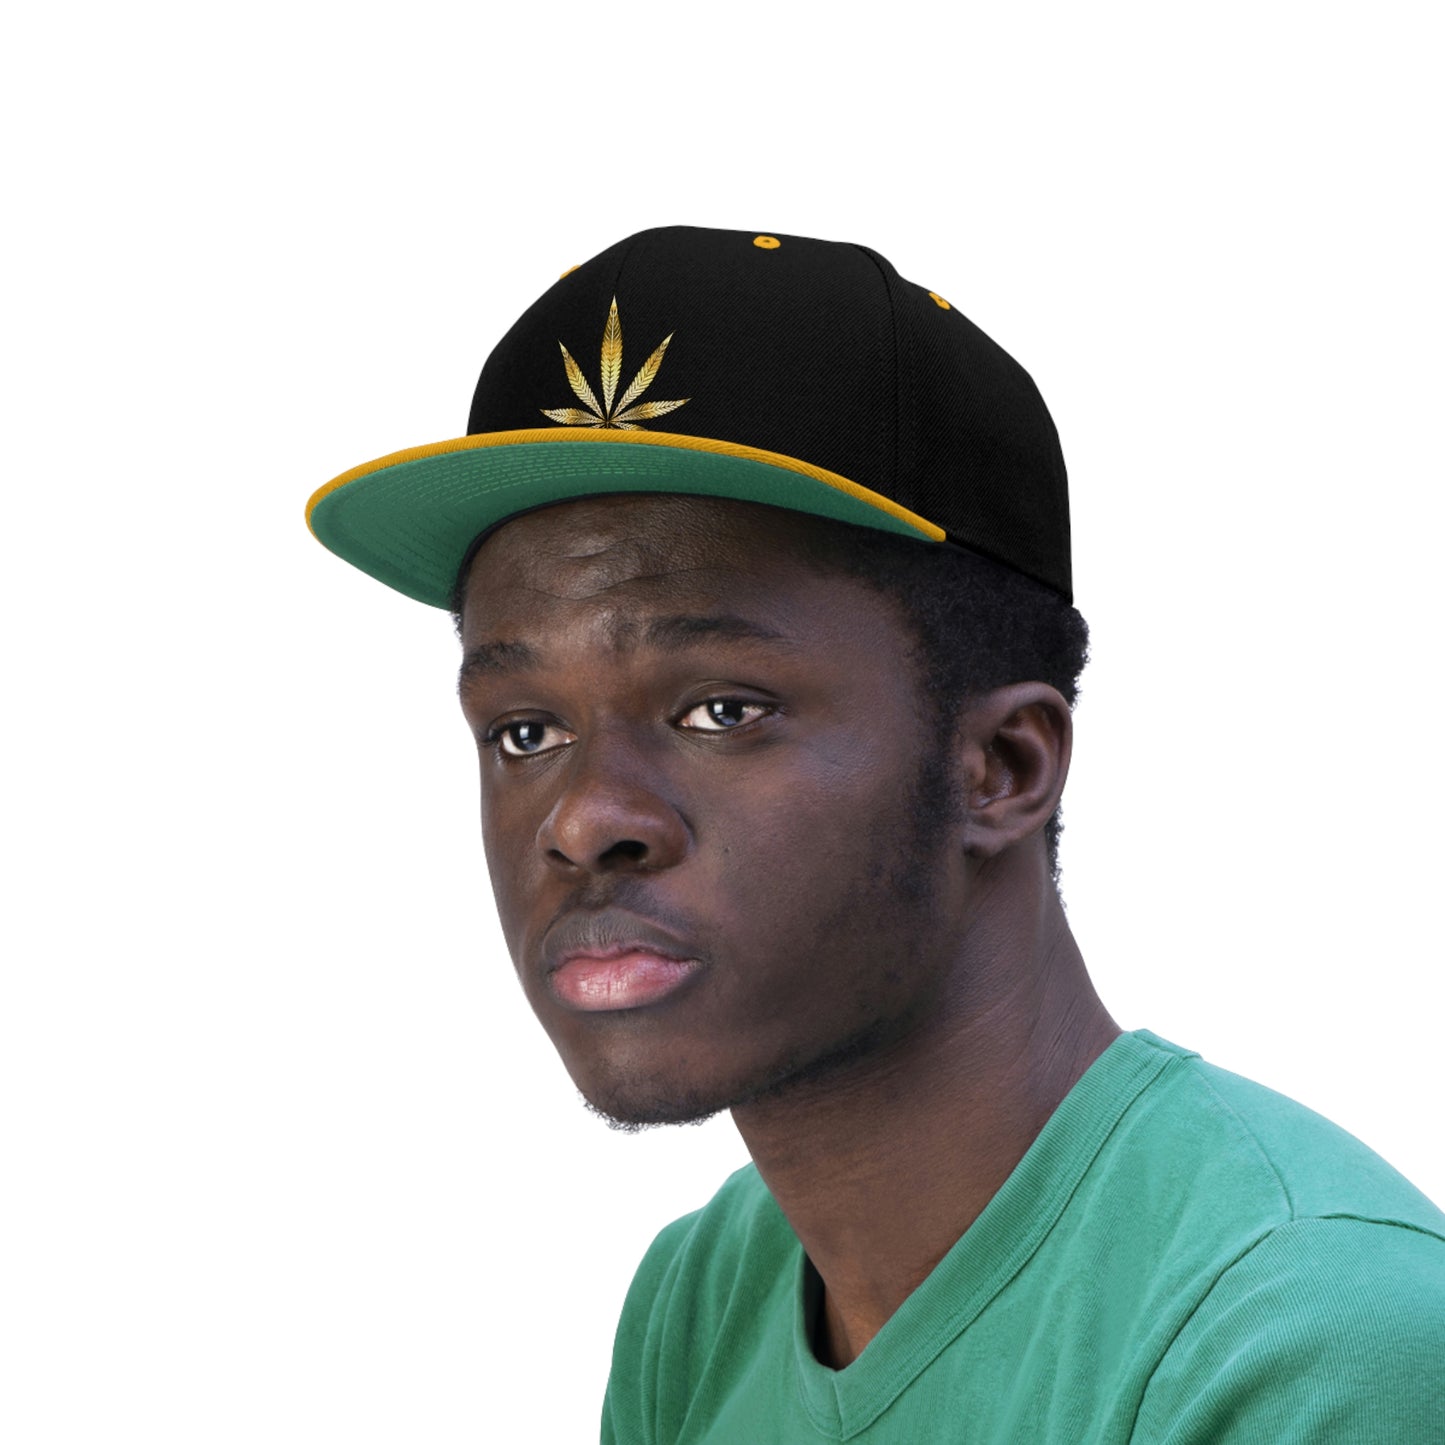 A young man looks out in the open while wearing the gold and black Gold Marijuana Leaf Snapback Hat with green underbill